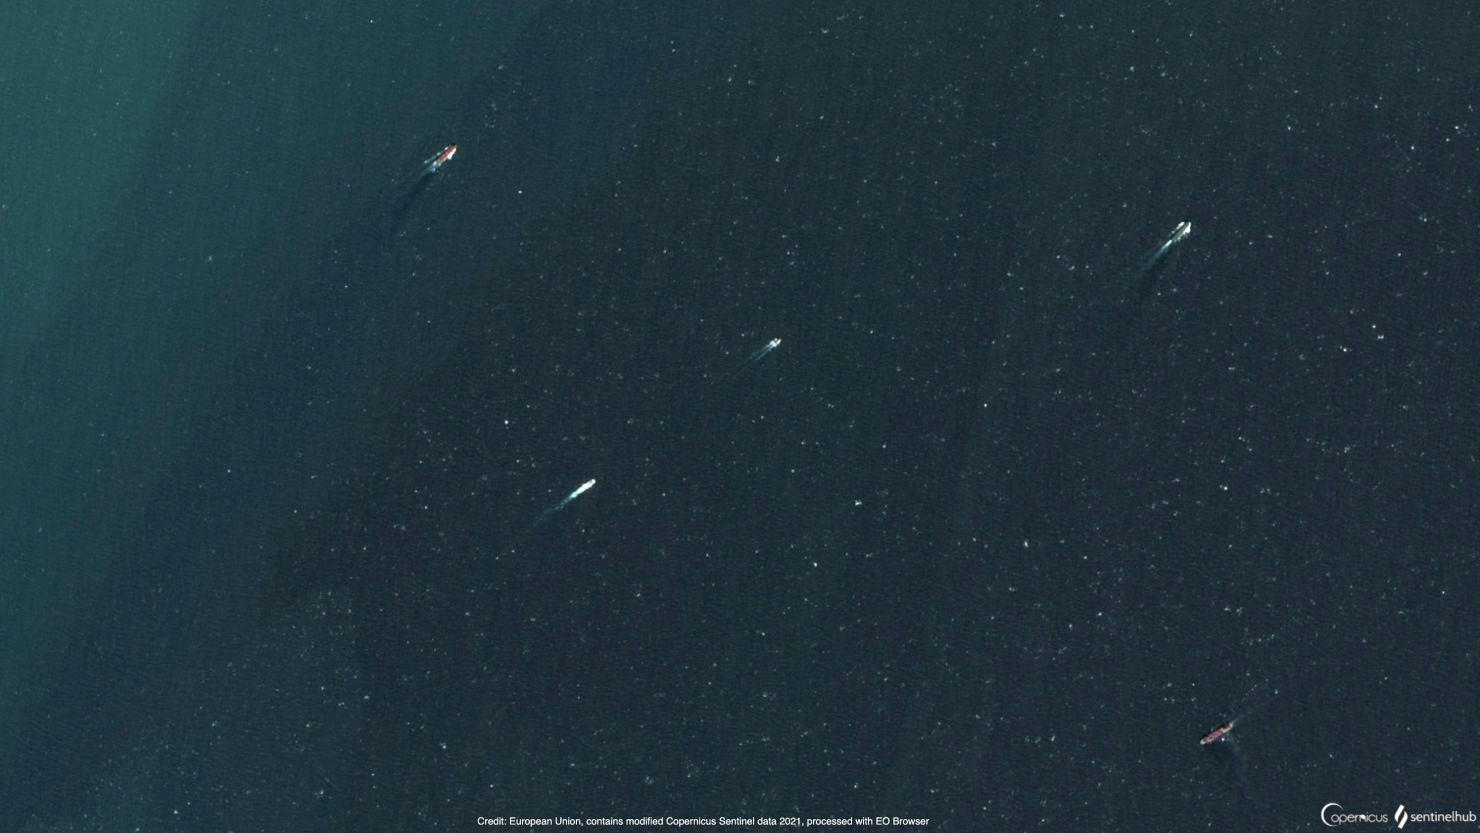 An image from European satellite imaging company Sentinel 2 shows what analyst HI Sutton says is a Chinese submarine in the lower left.